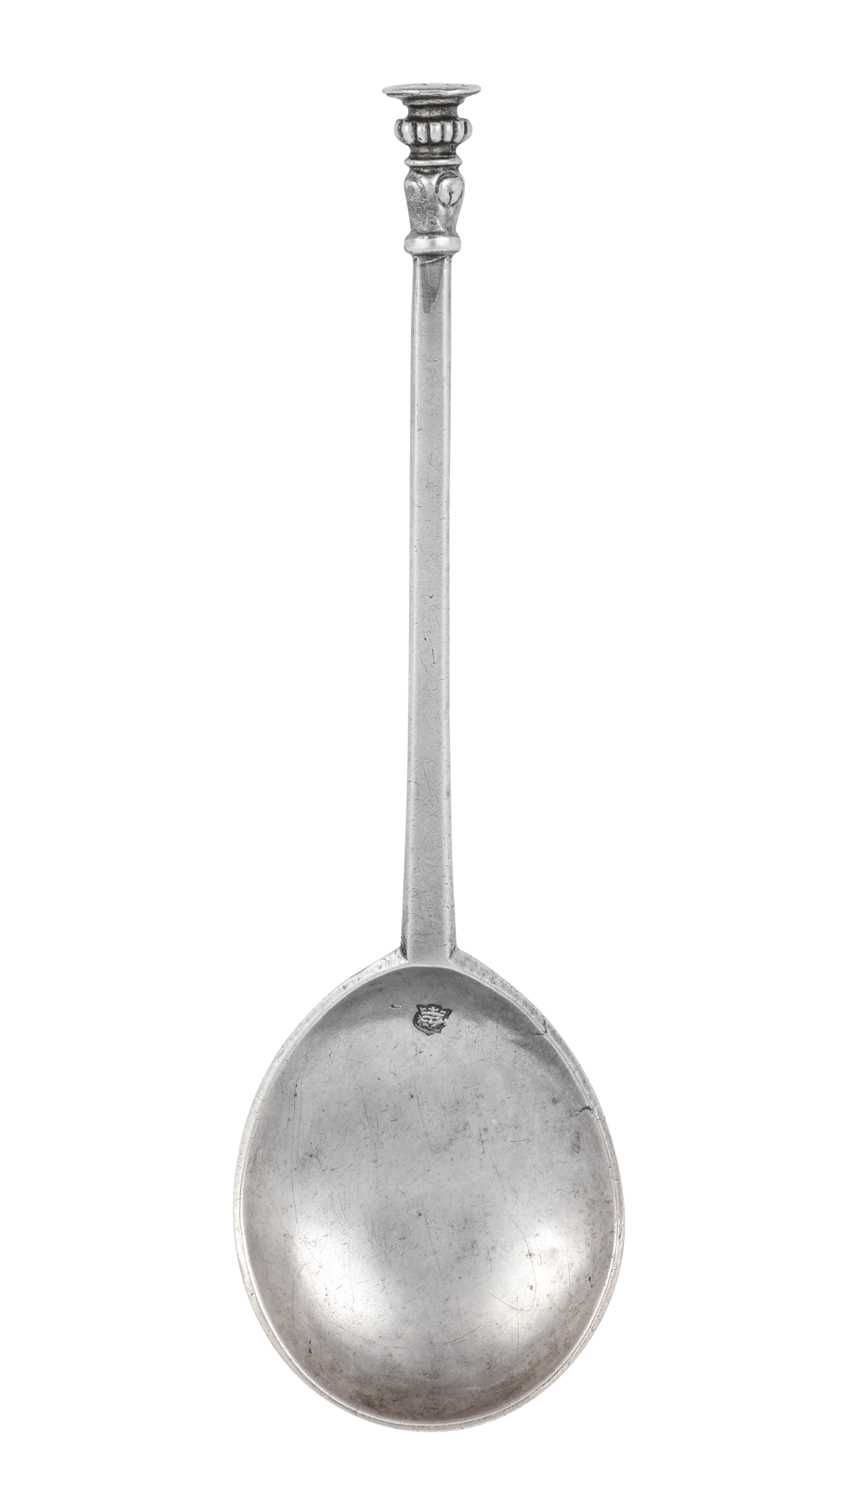 A Charles I Silver Seal-Top Spoon, Maker's Mark F in Shield, London, 1636